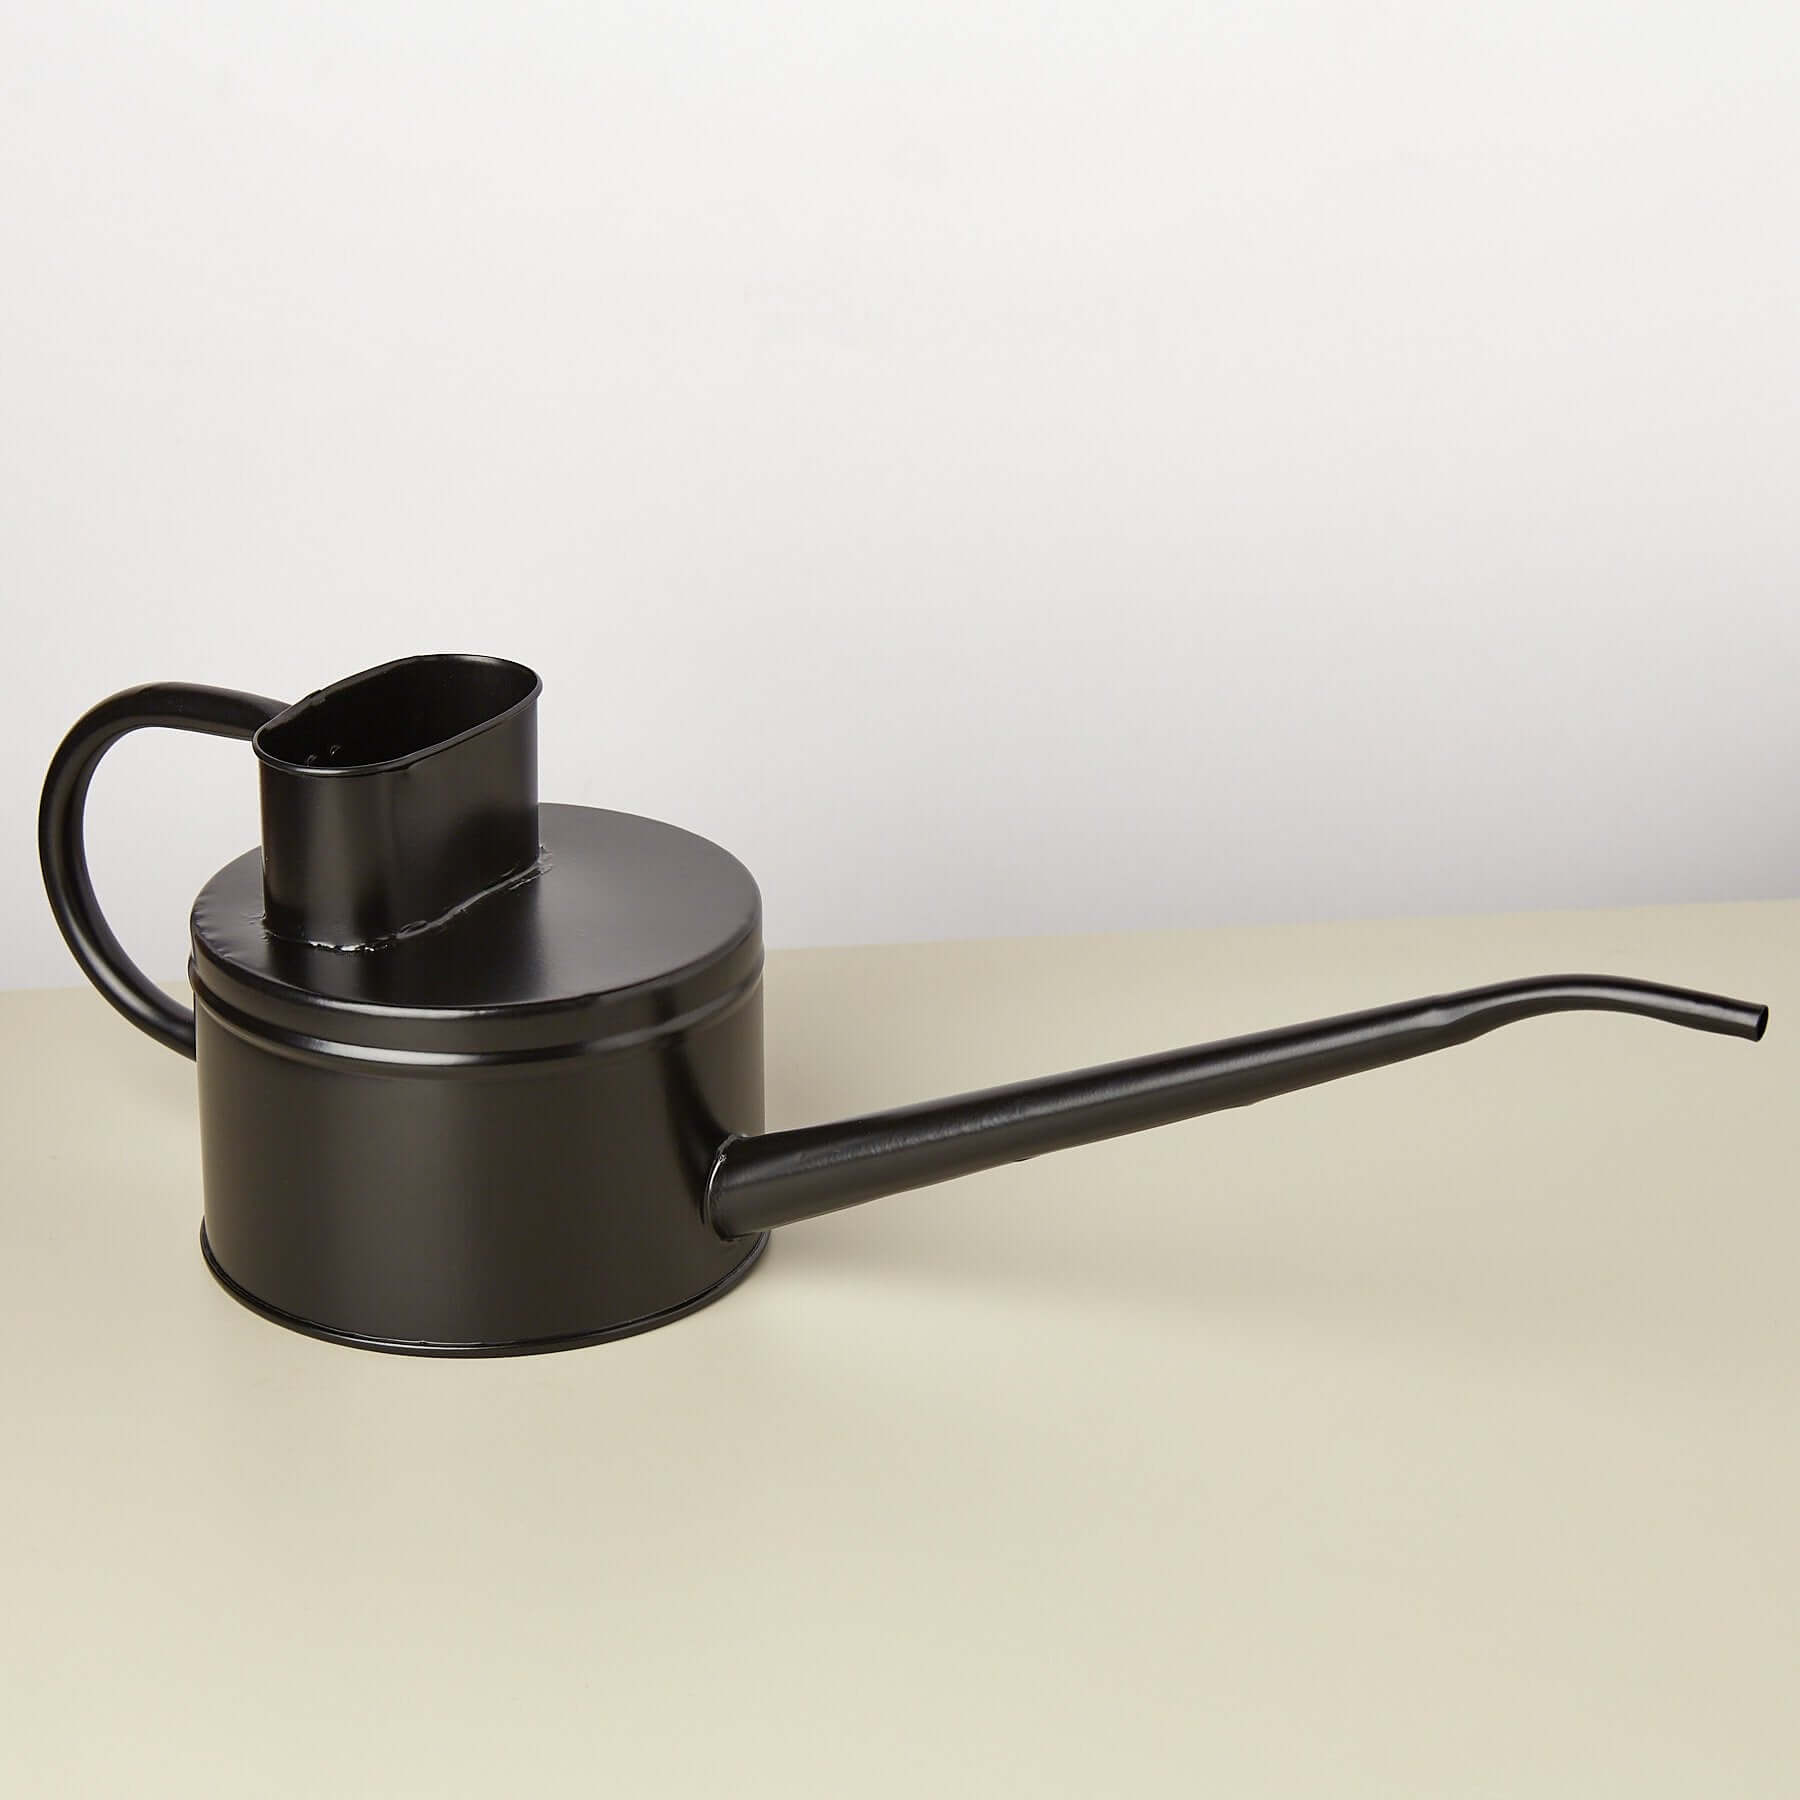 Elegant Steel Watering Can | Modern house plants that clean the air